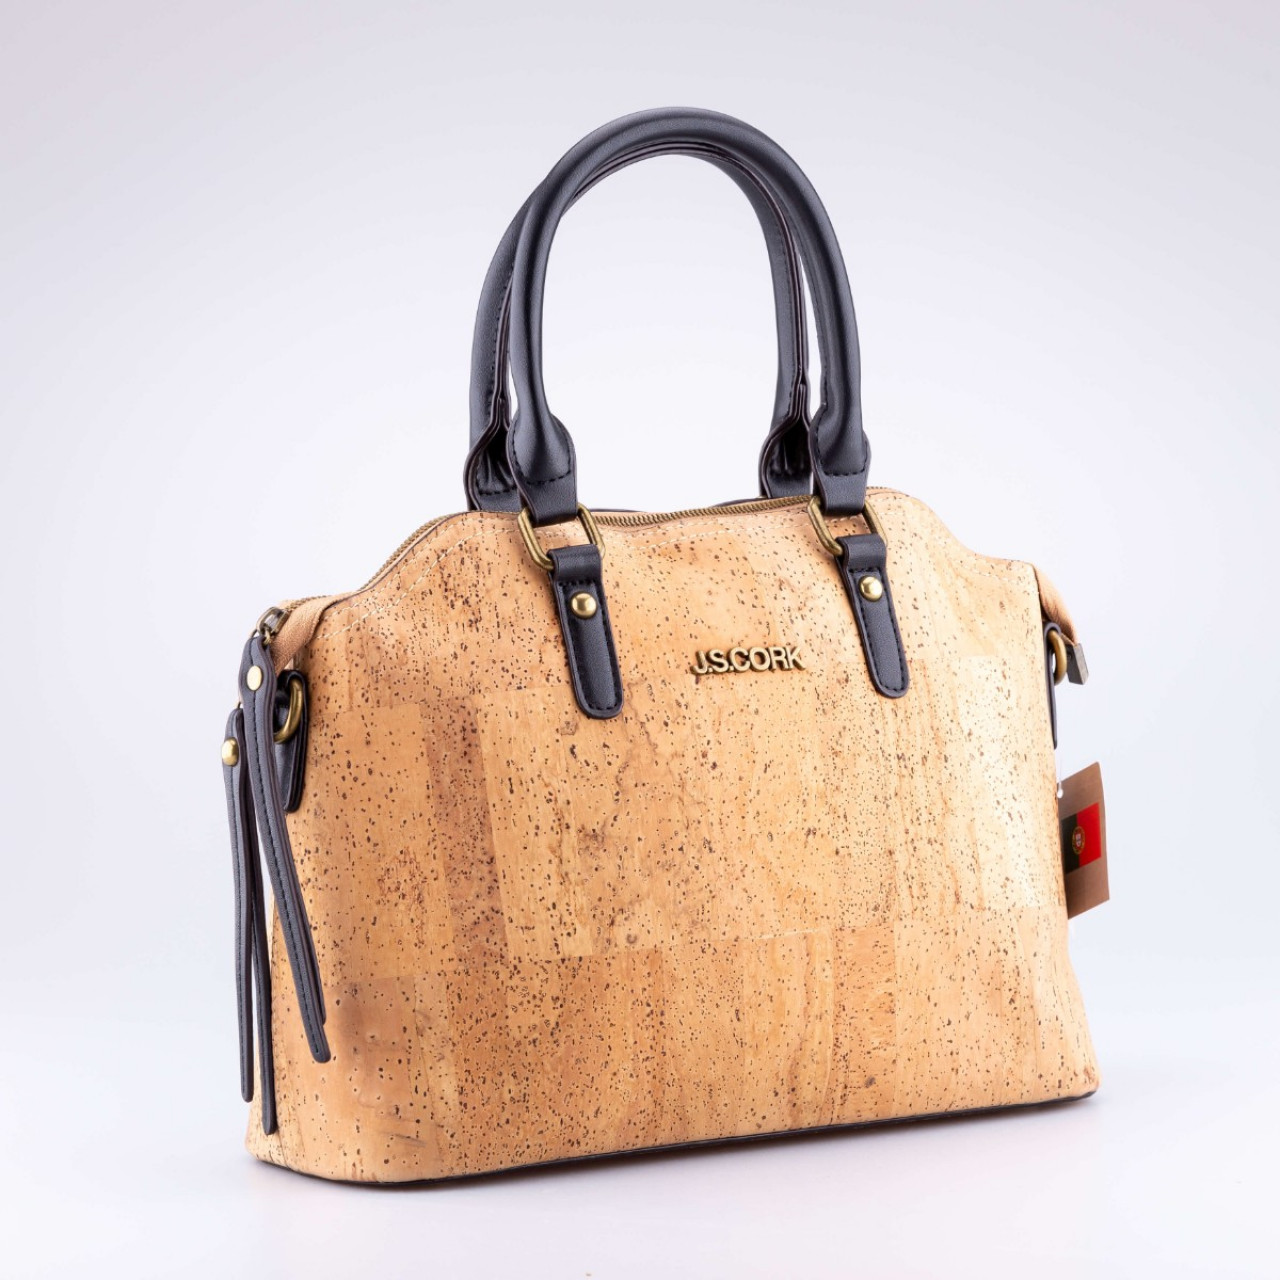 Cork all natural handbags, wallets, accessories and toys, vegan,  sustainable products. — The Cork Shop